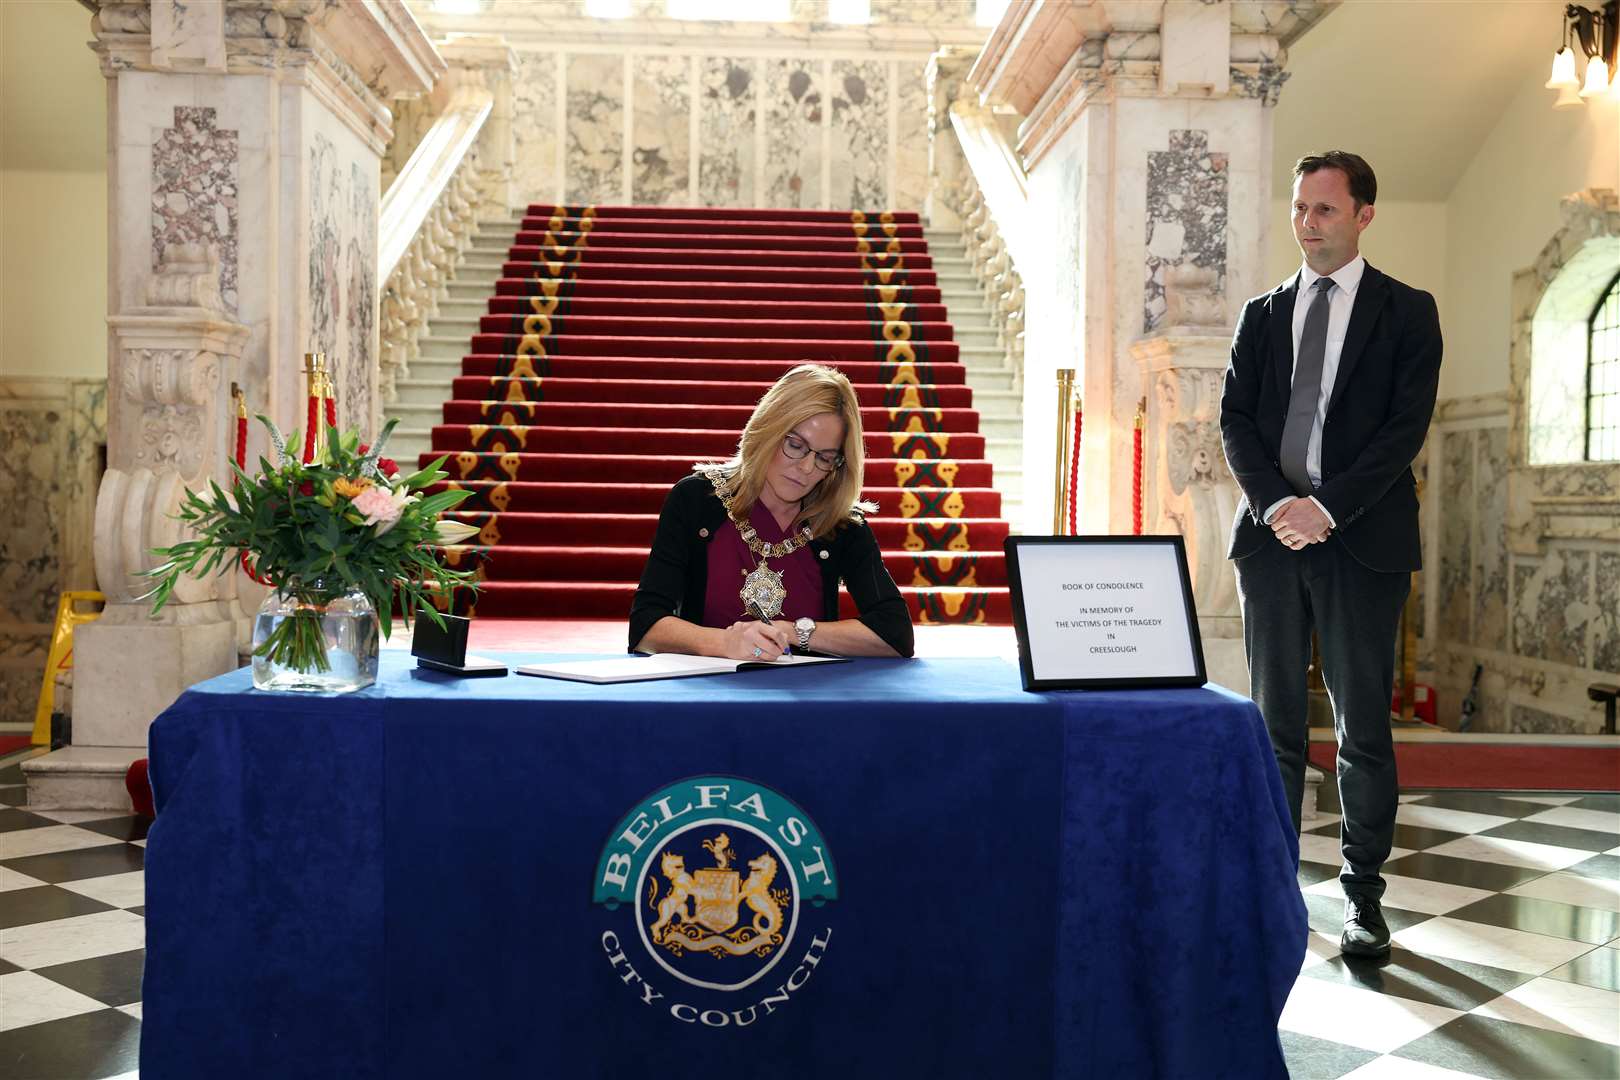 The Lord Mayor of Belfast Tina Black signs a book of condolence watched by Laurence Sims, Joint Secretary to the Irish Secretariat in Belfast (Belfast City Council/PA)